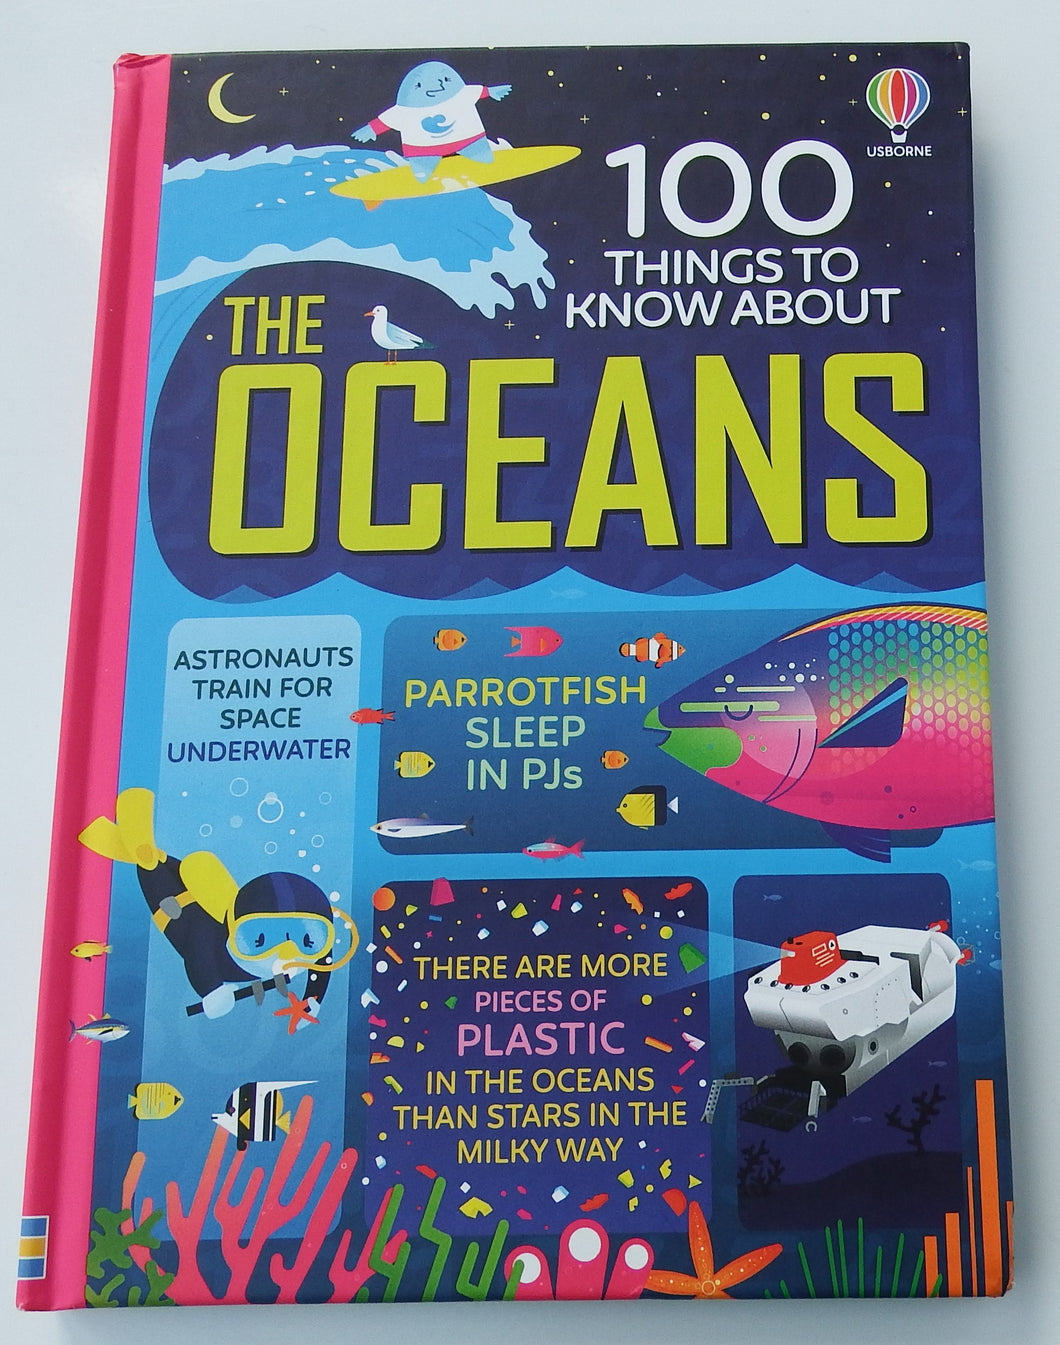 100 things to know about the Oceans